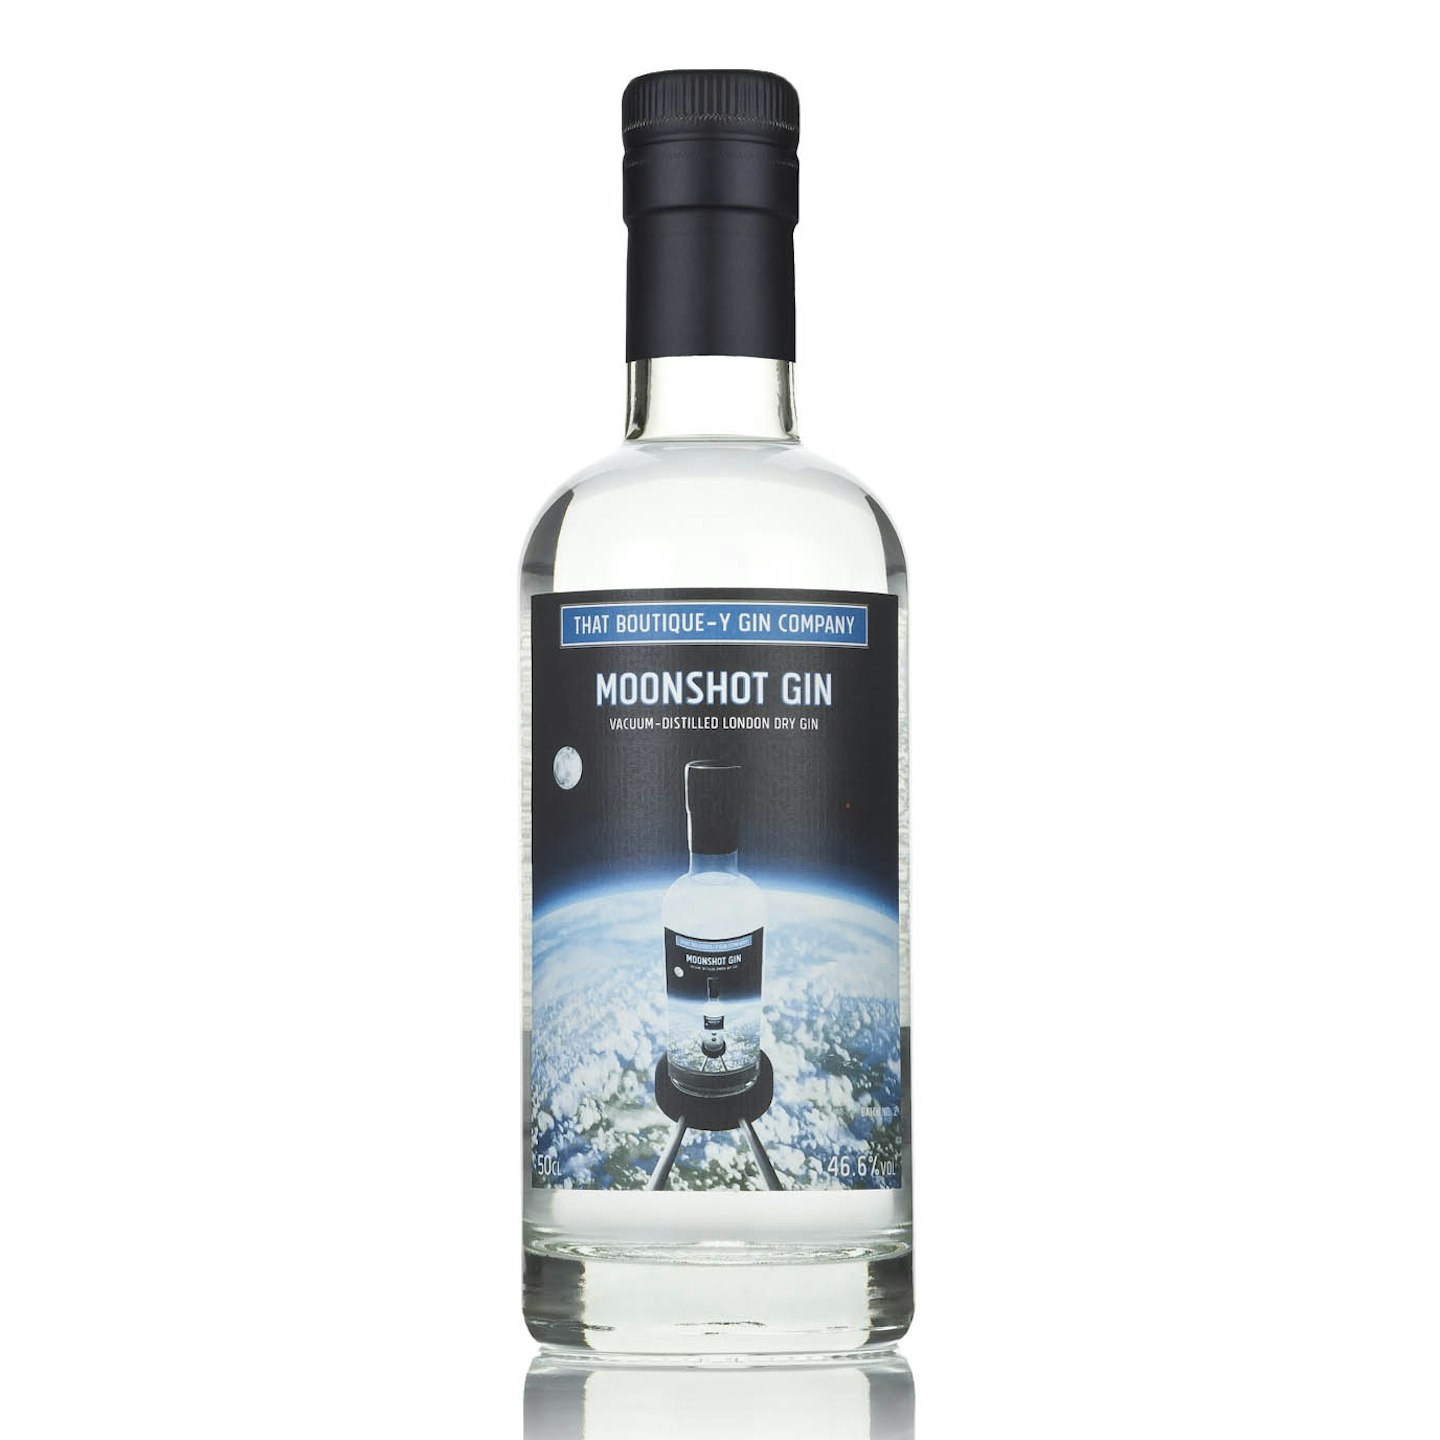 Moonshot Gin from That Boutique-y Gin Company